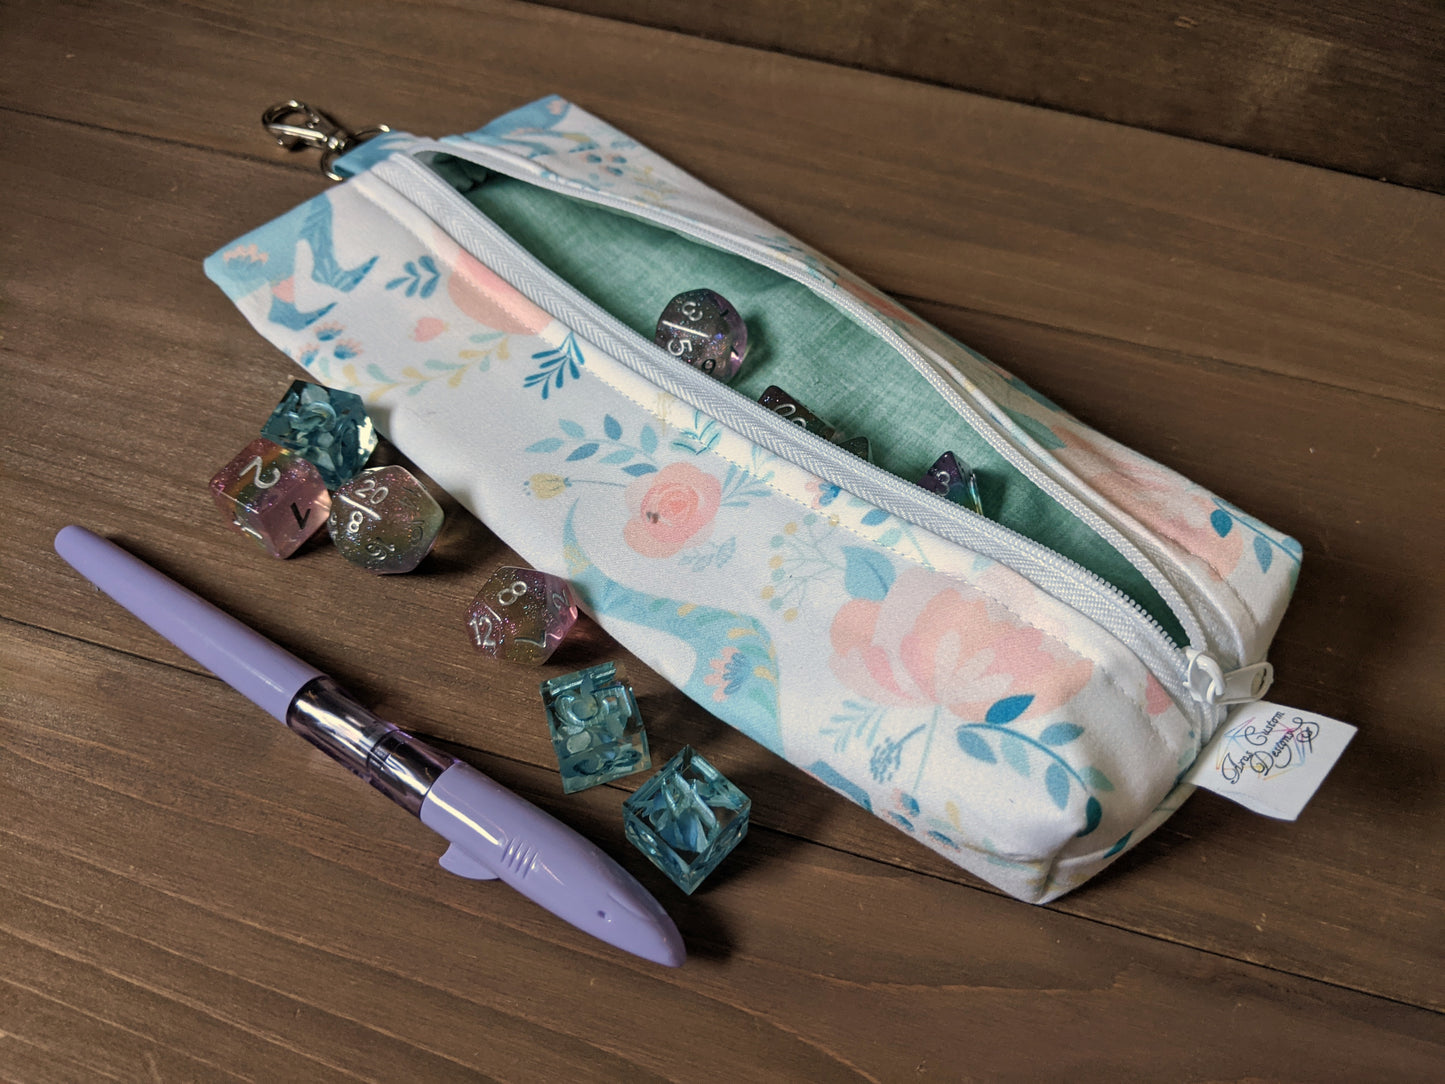 A zippered bag with pastel floral fabric featuring T-Rexes sits on a wood surface with dice and a shark pen.